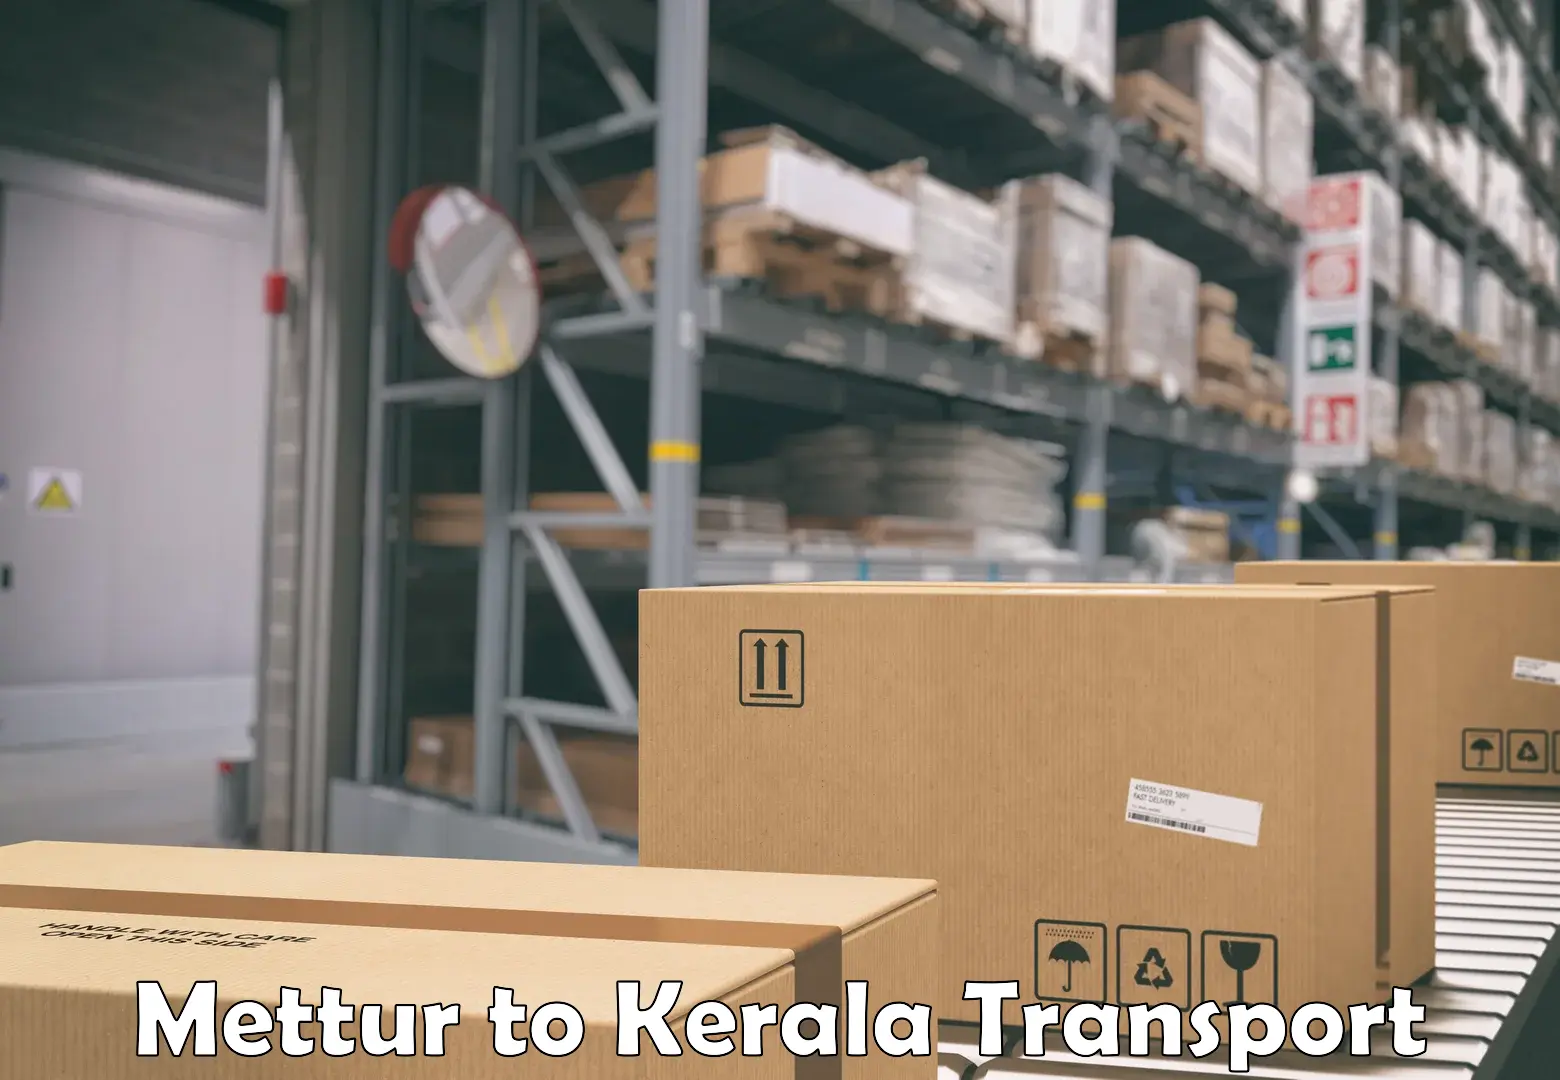 Express transport services Mettur to Calicut